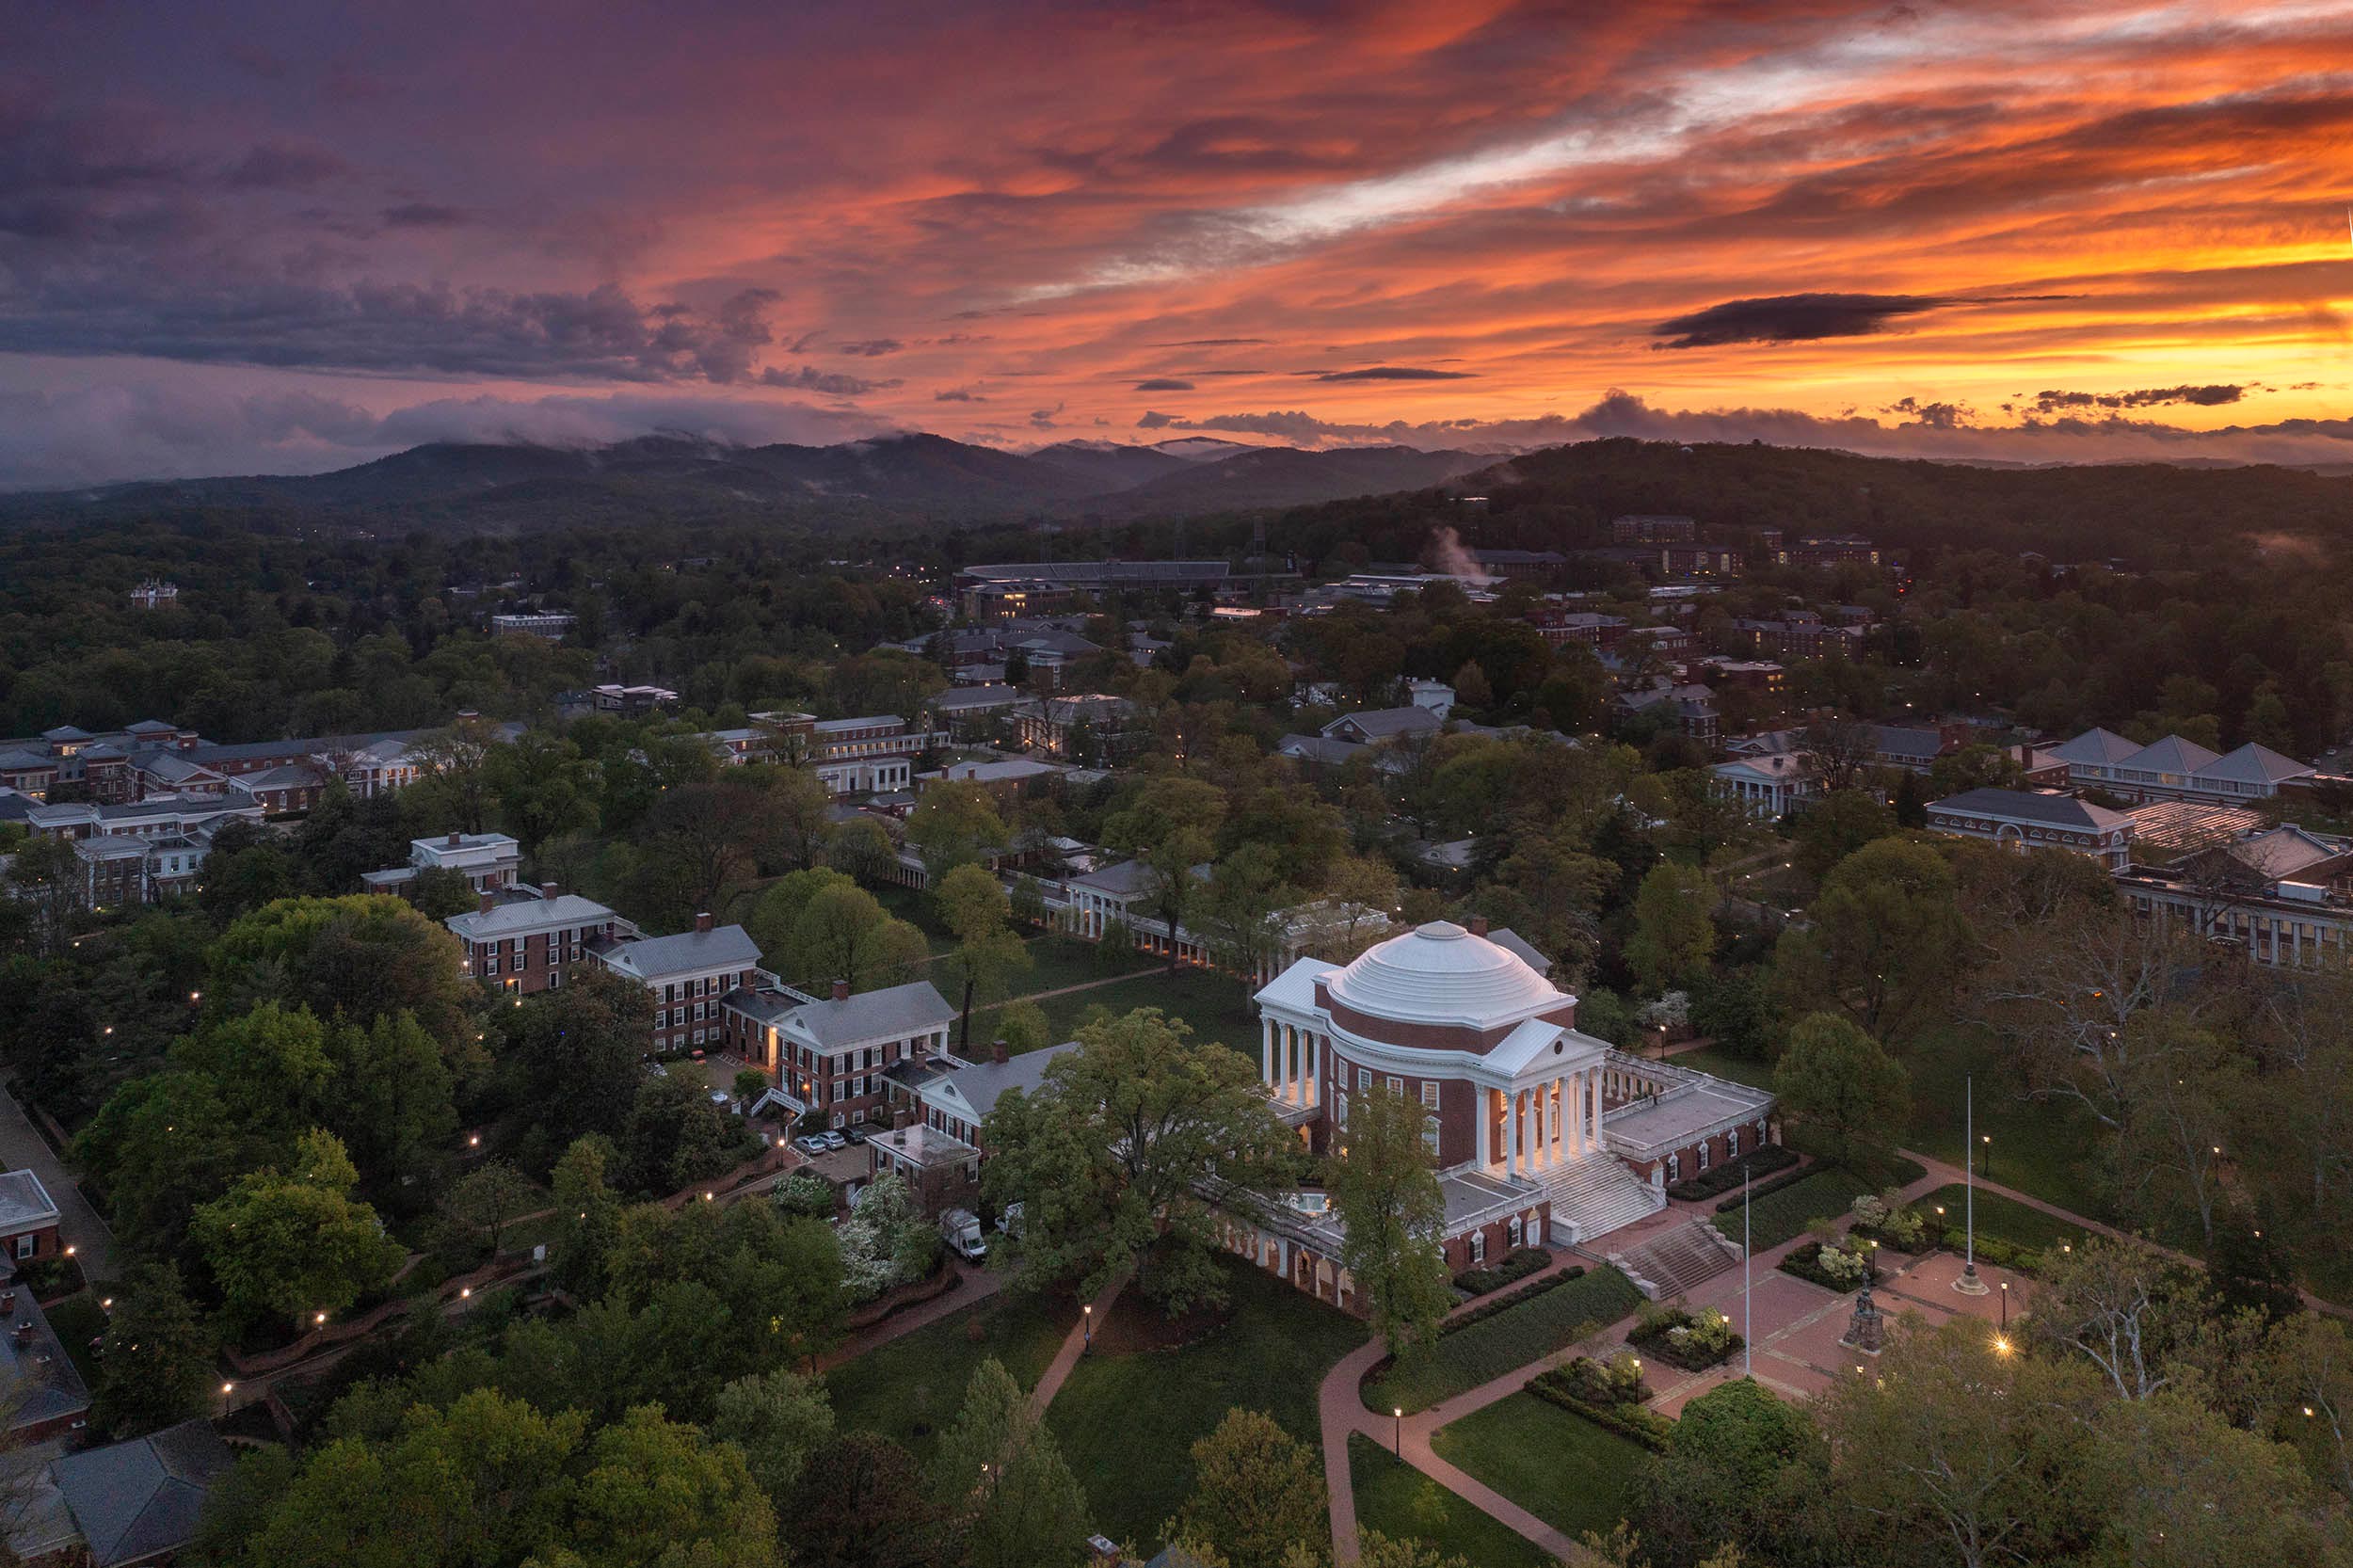 An aerial shot of a colorful sunset over UVA Grounds.